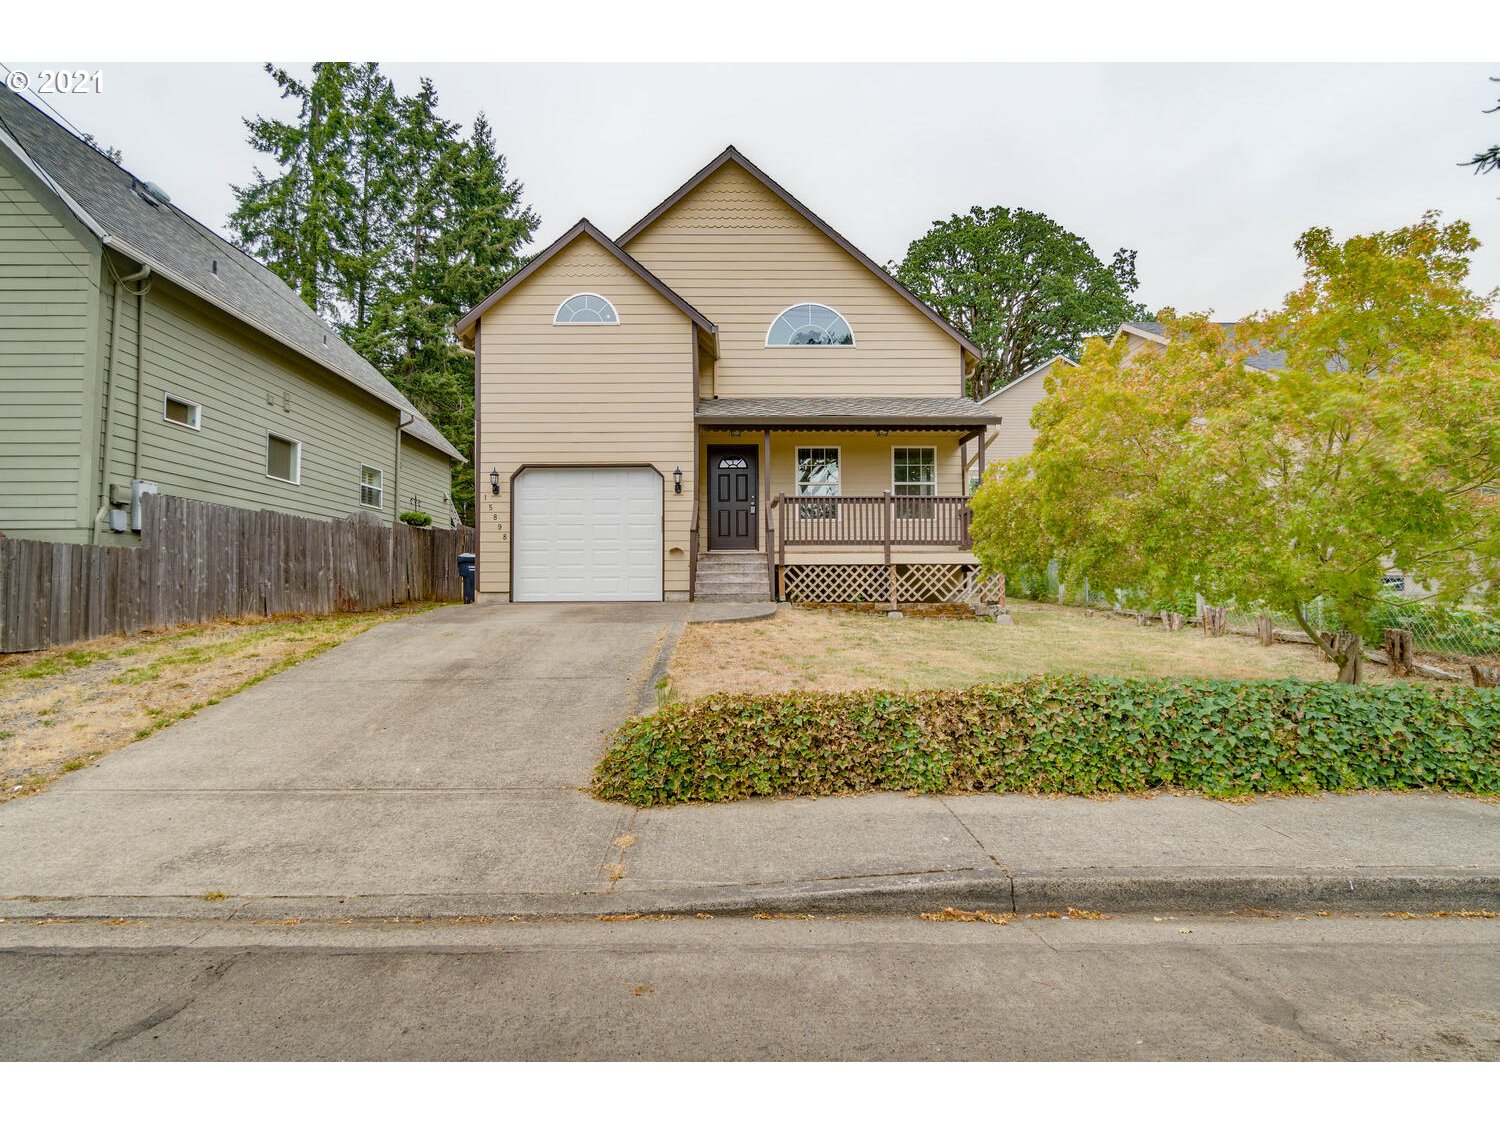 15898 APPERSON BLVD (1 of 30)